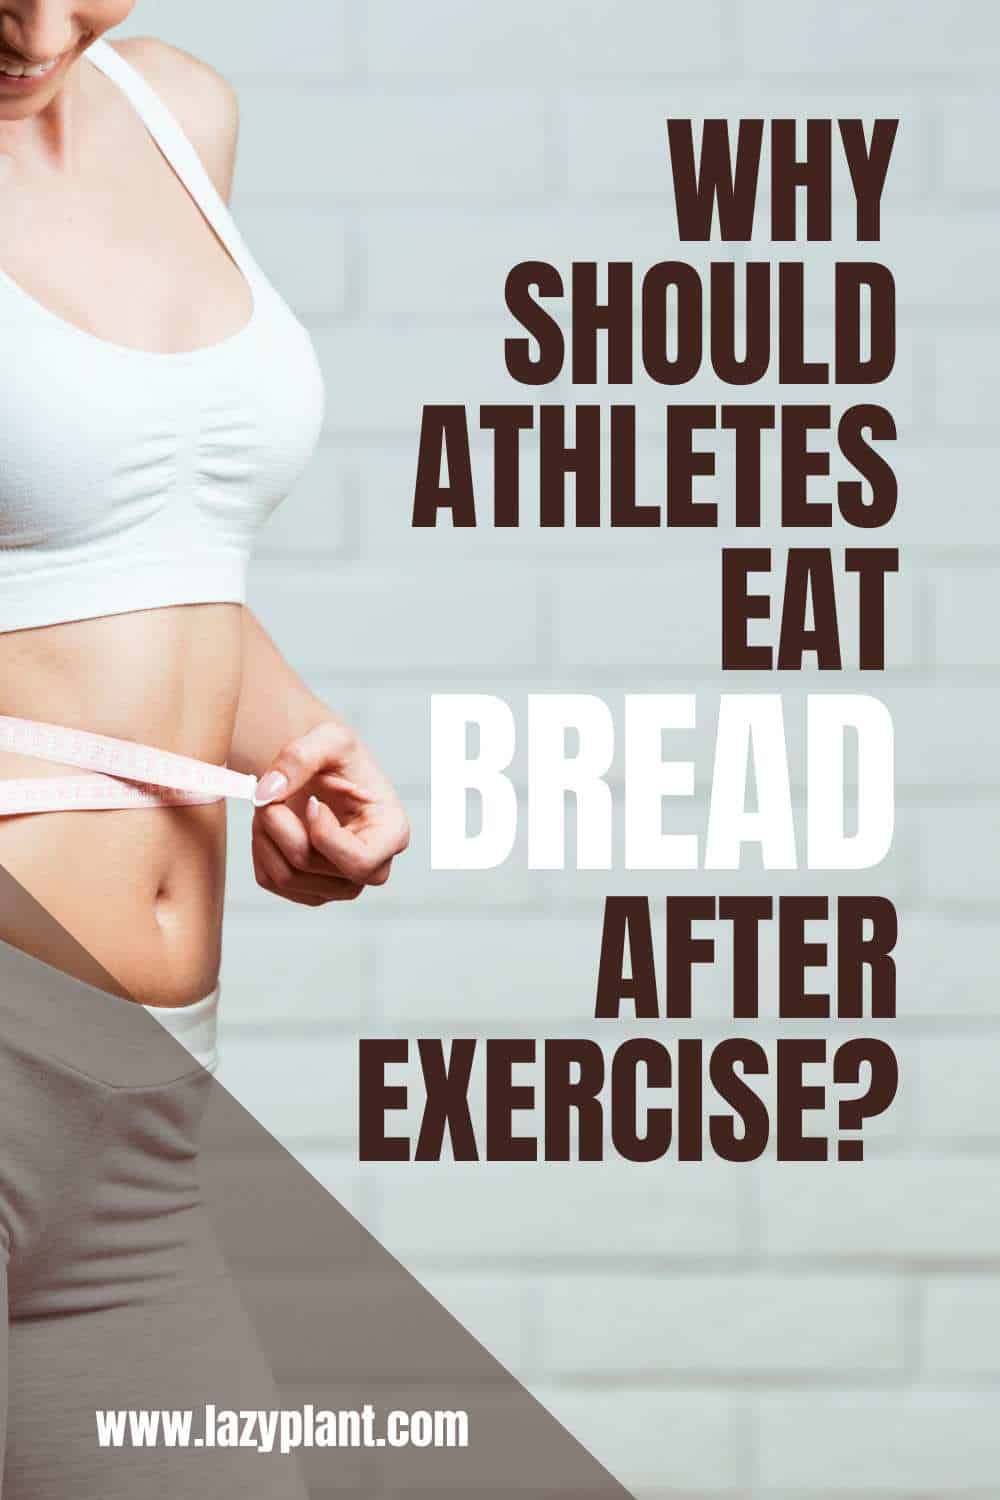 Why should athletes eat white bread after a workout?